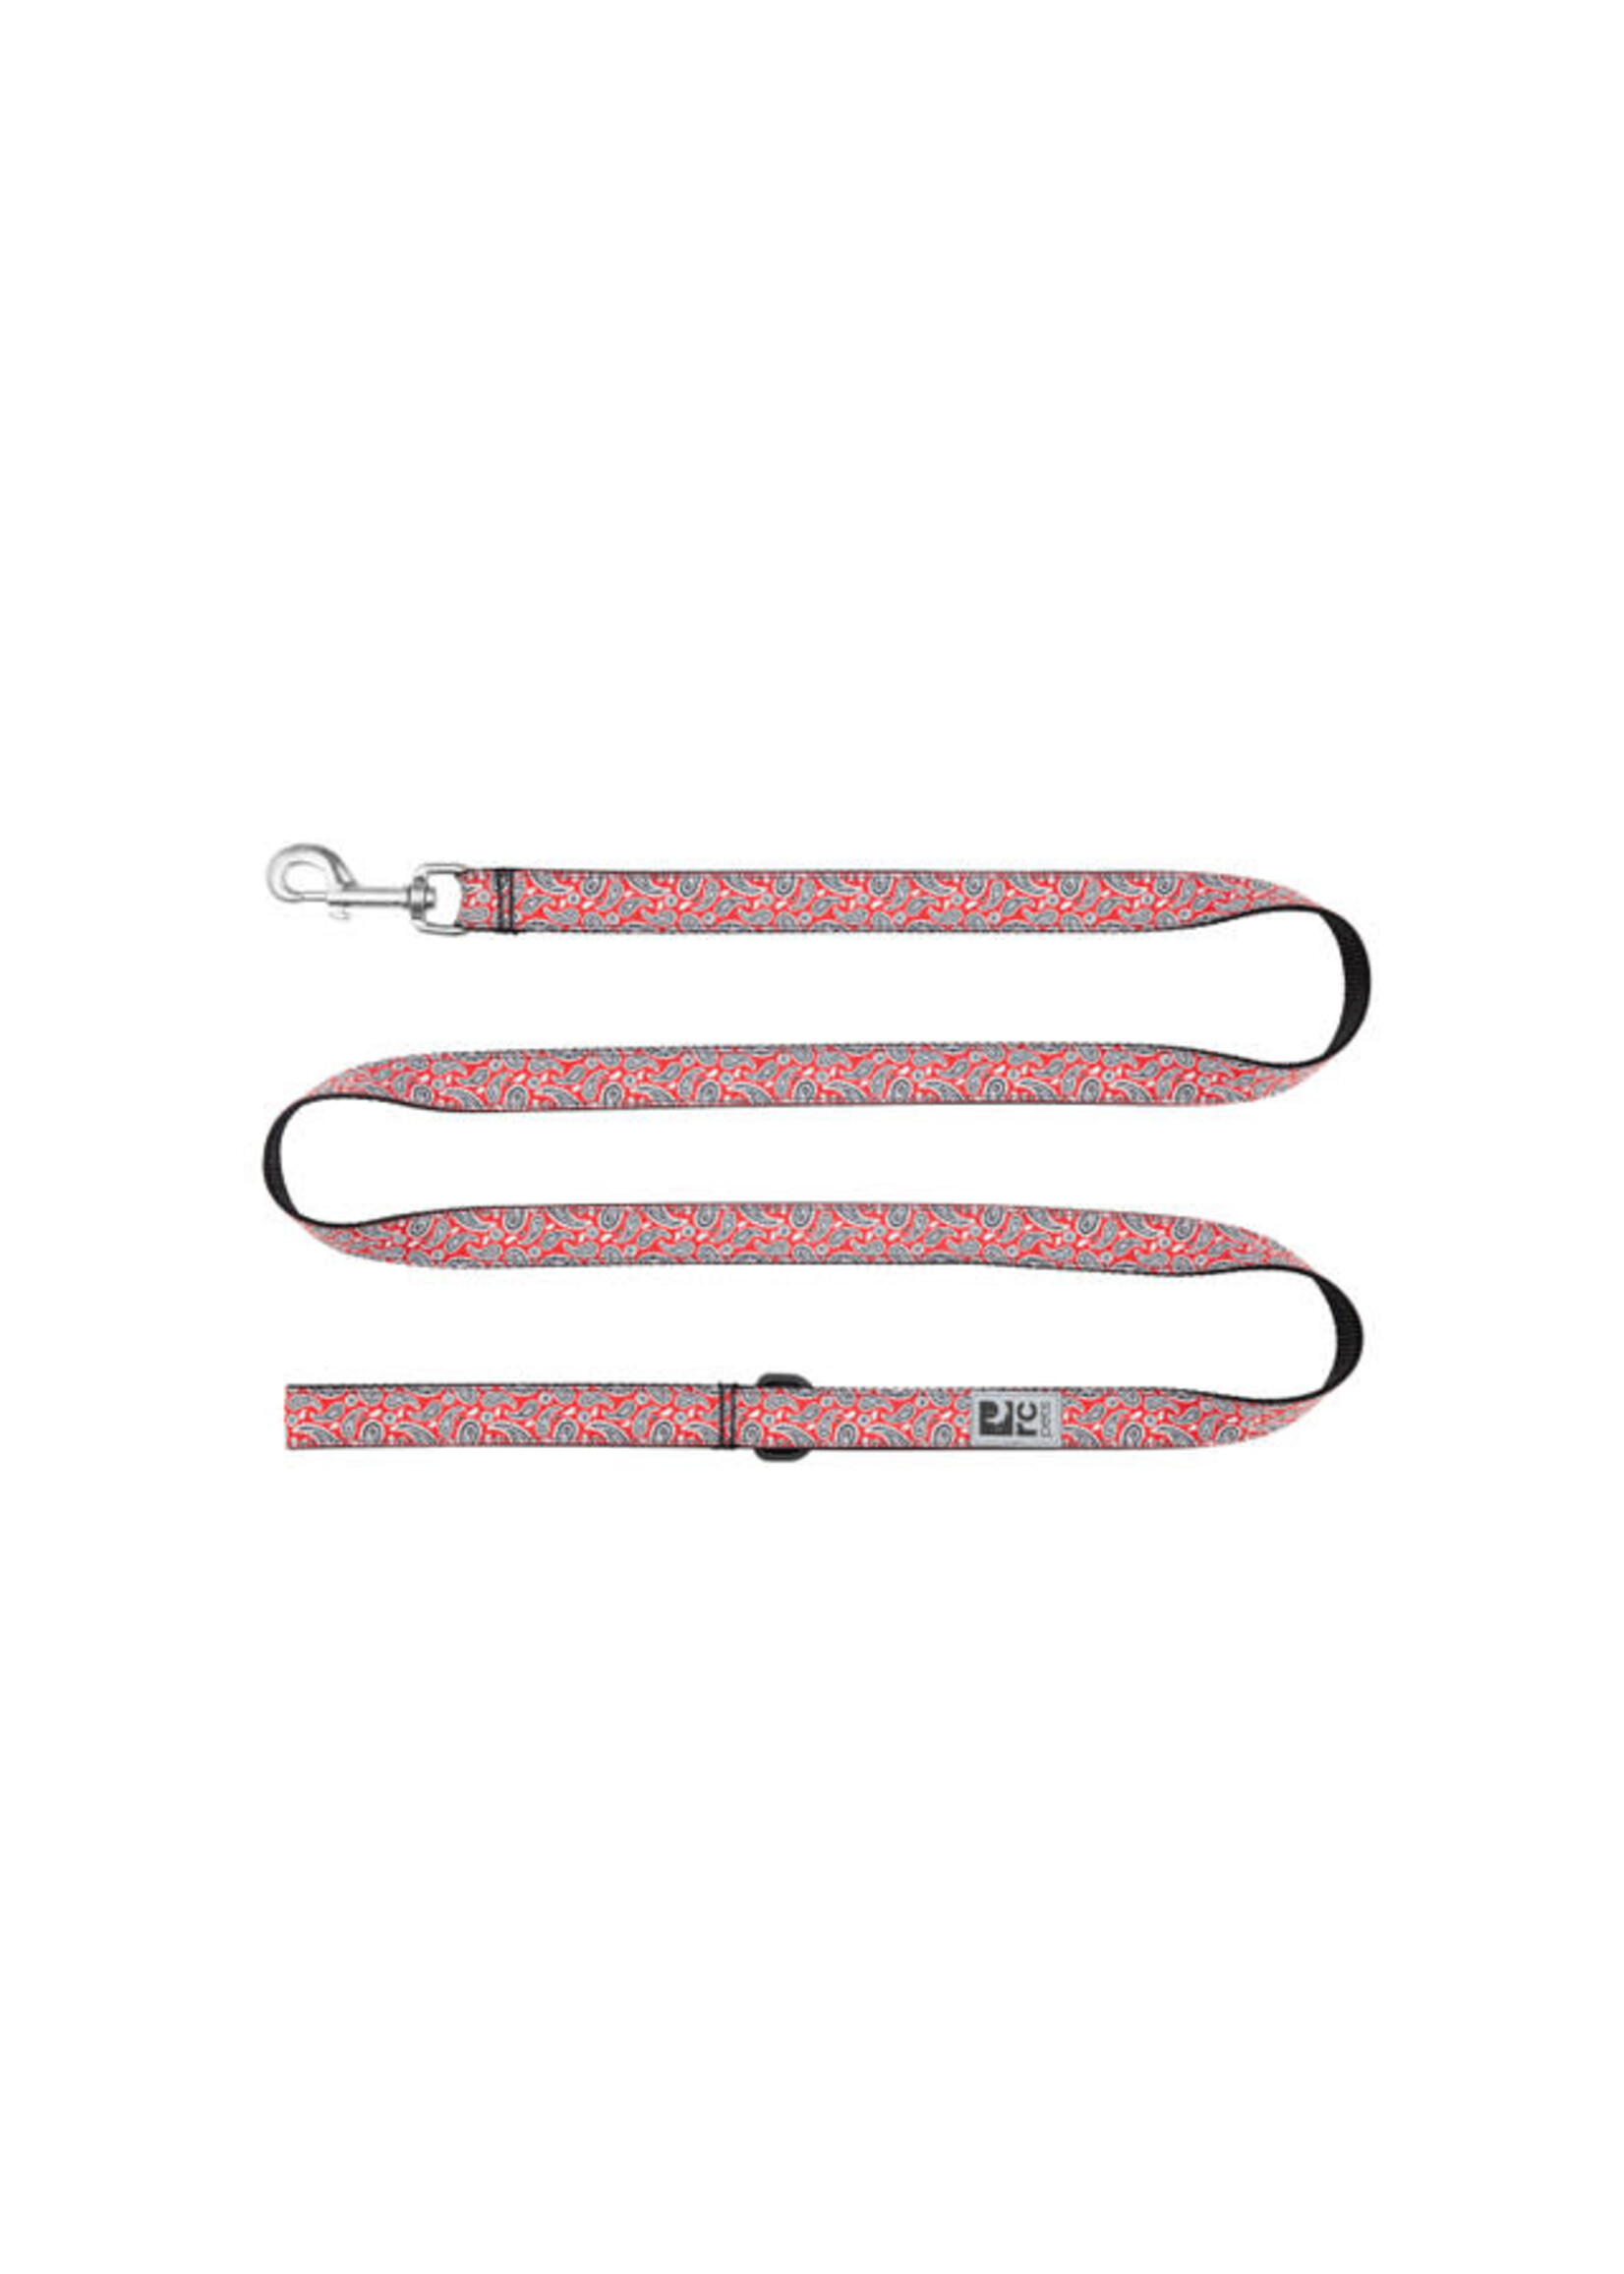 RC Pets Products RC Pets - Leash 1x6' Red Rebel